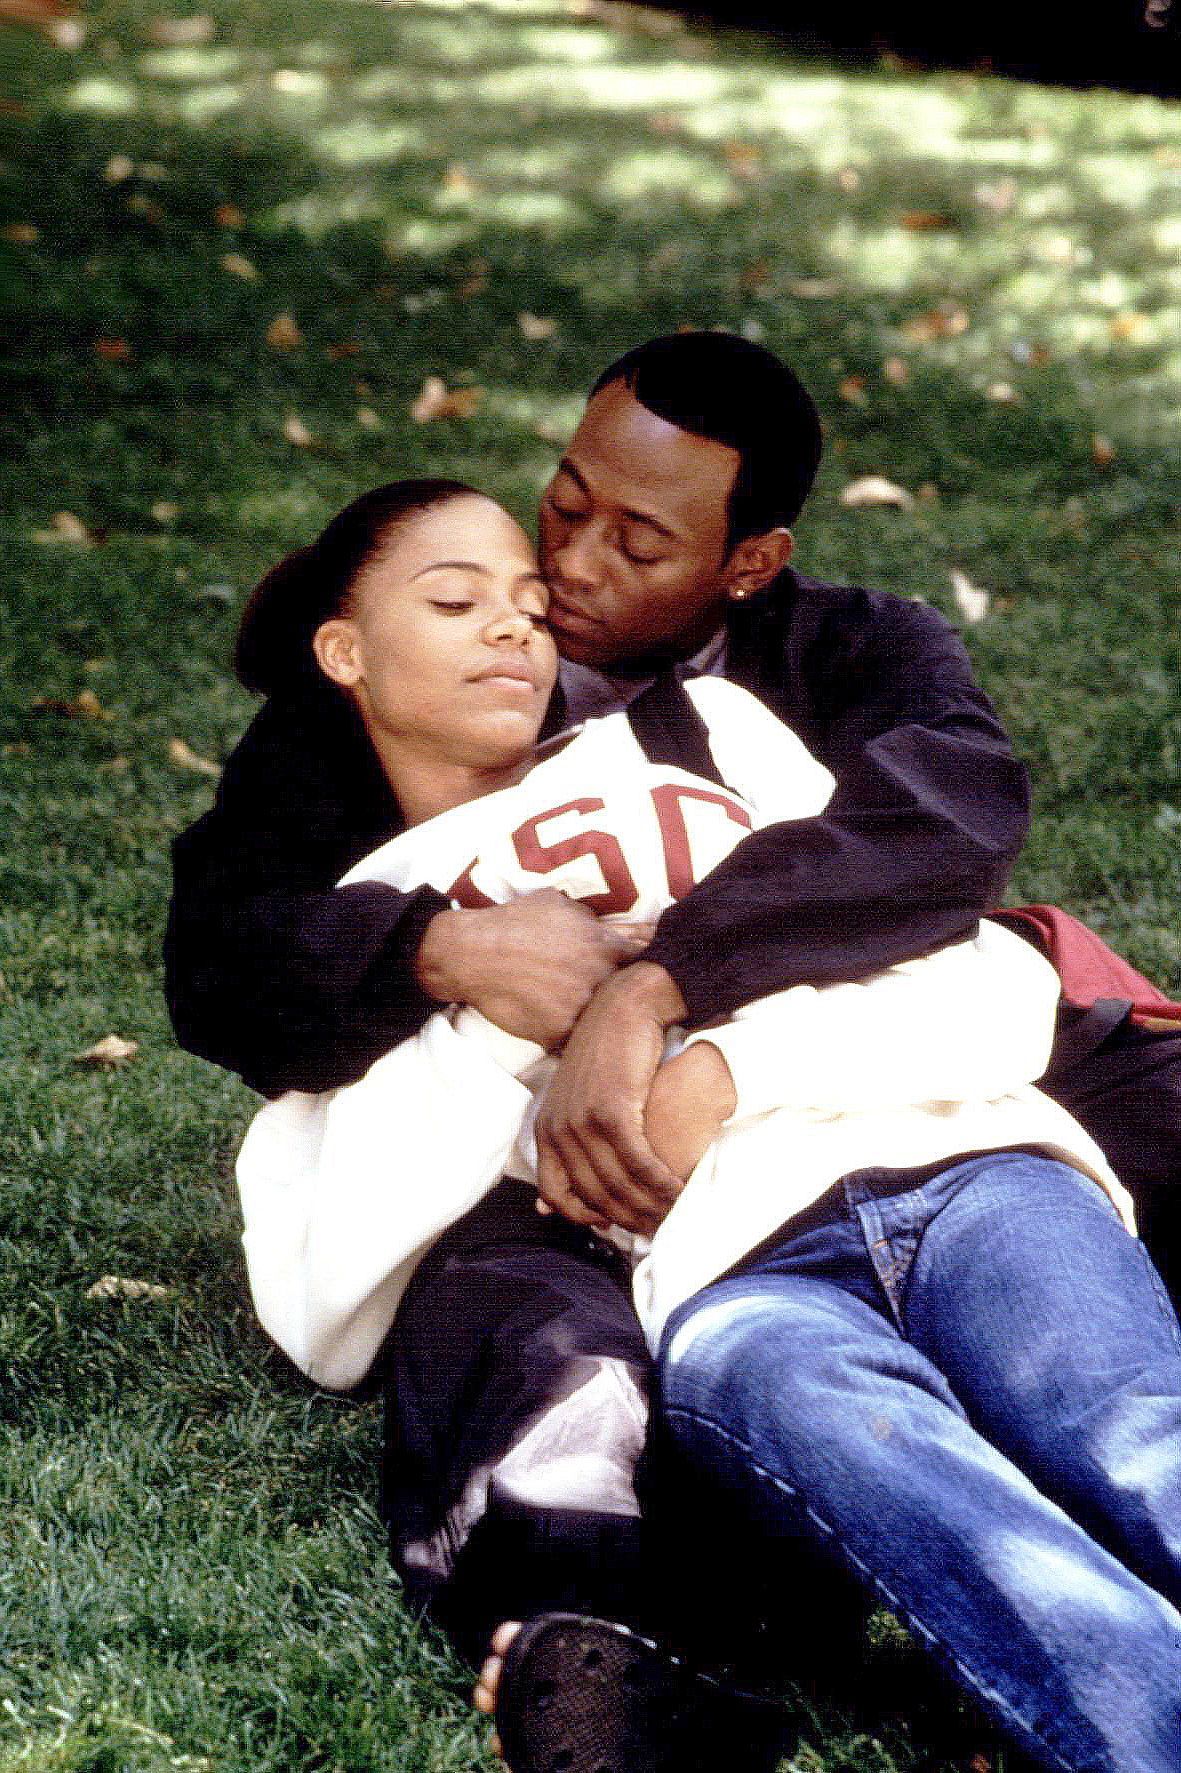 watch love and basketball online for free no download